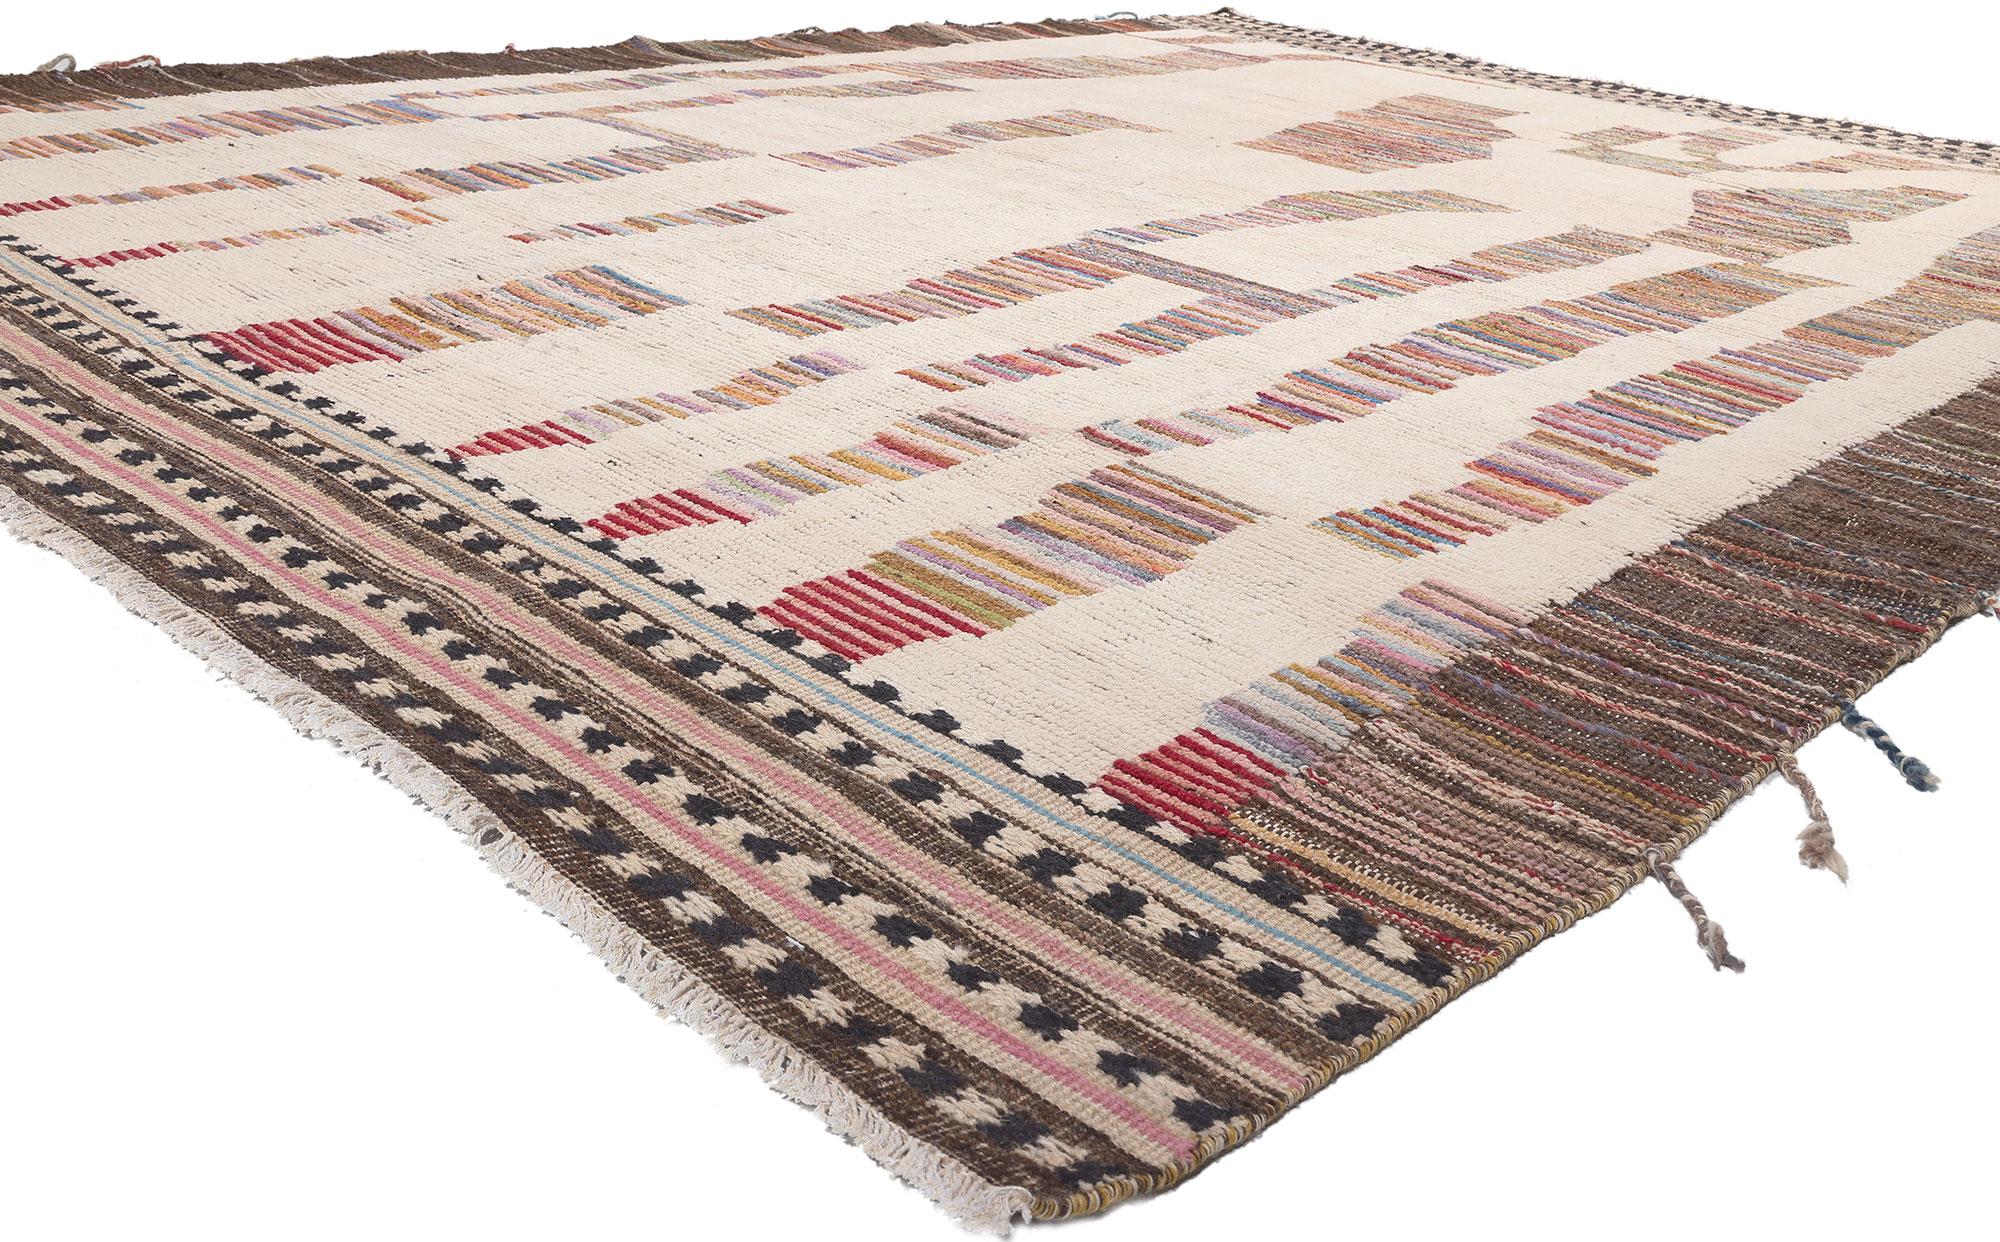 81010 Modern Moroccan Rug with Earth-Tone Colors, 10'04 x 13'09. Emanating nomadic charm with incredible detail and texture, this modern Moroccan area rug will take on a curated lived-in look that feels timeless while imparting a sense of warmth and